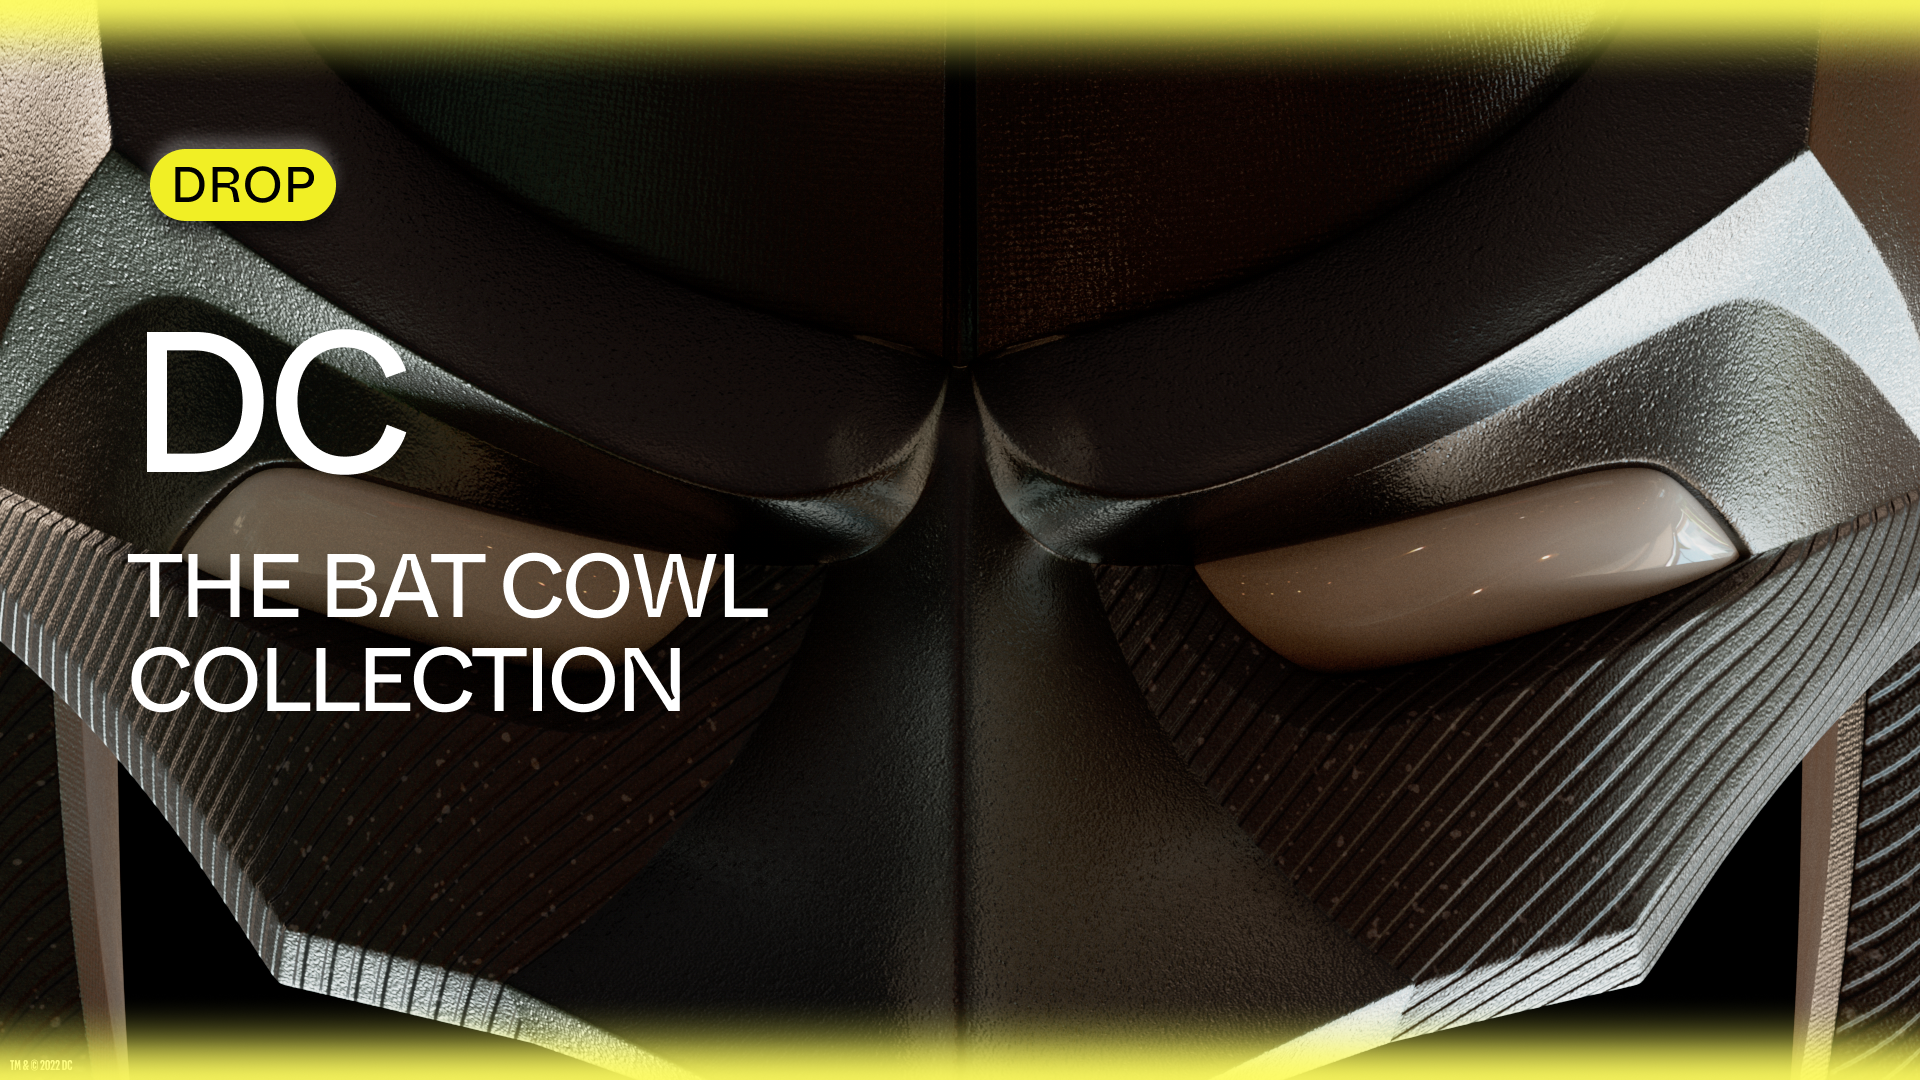 Introducing The DC Bat Cowl Collection.